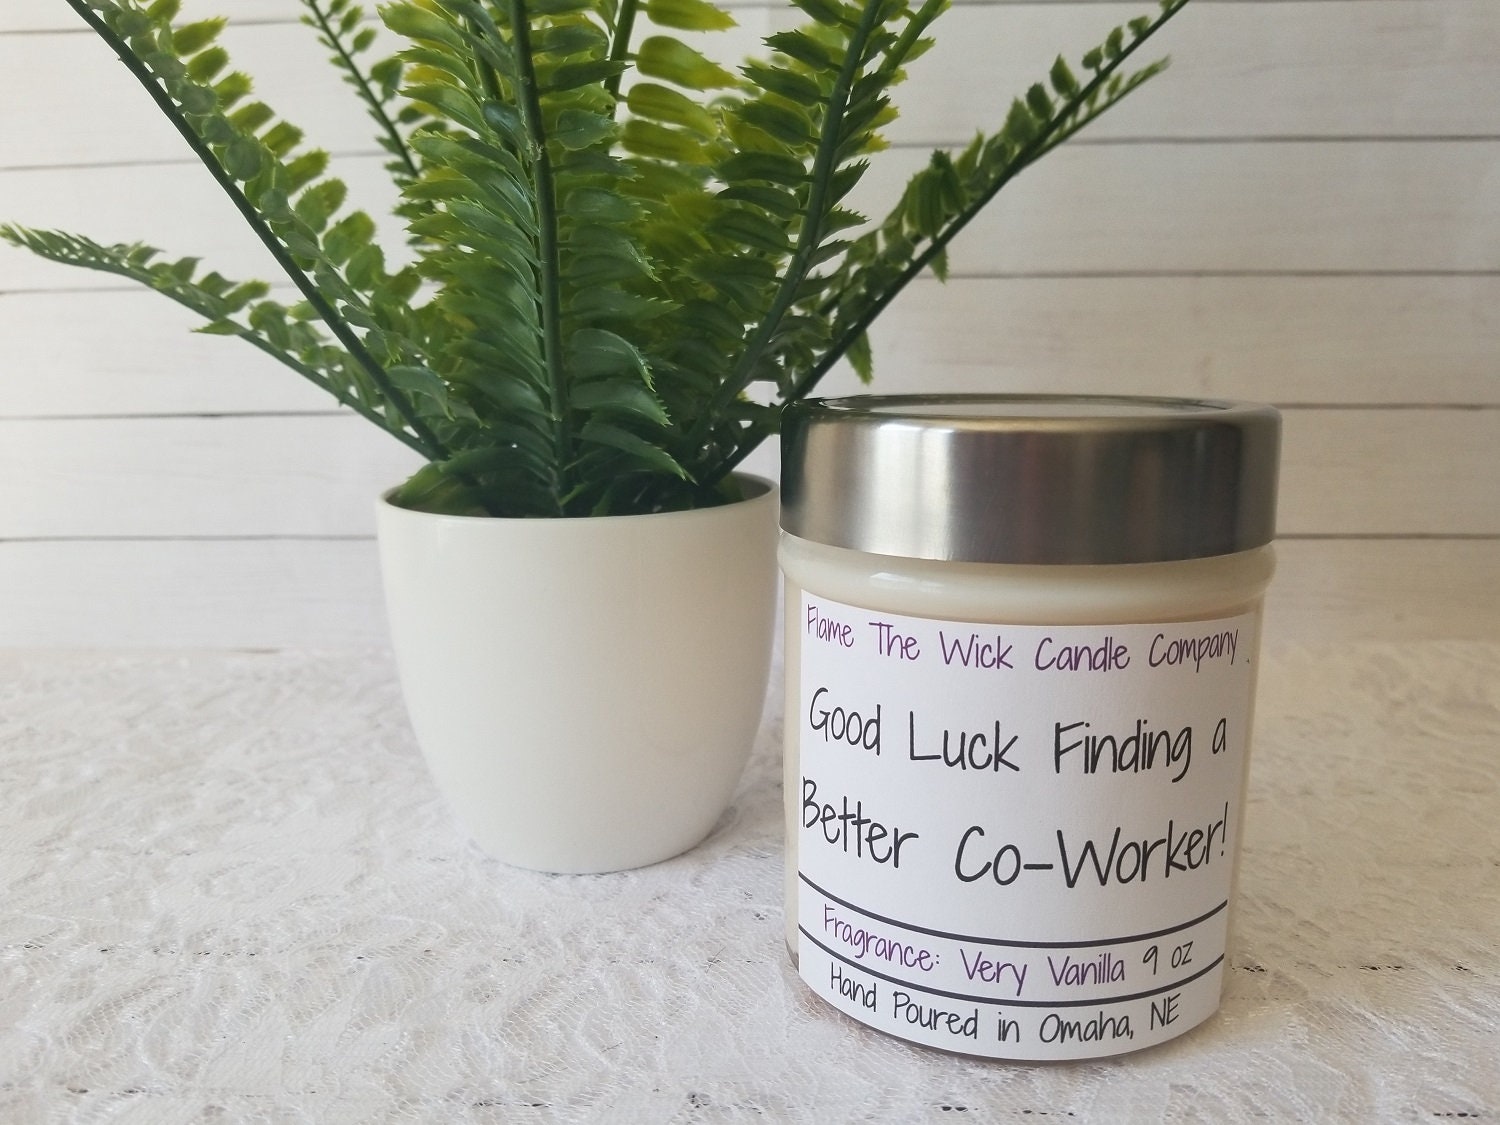 The Flaming Wick Candle Co